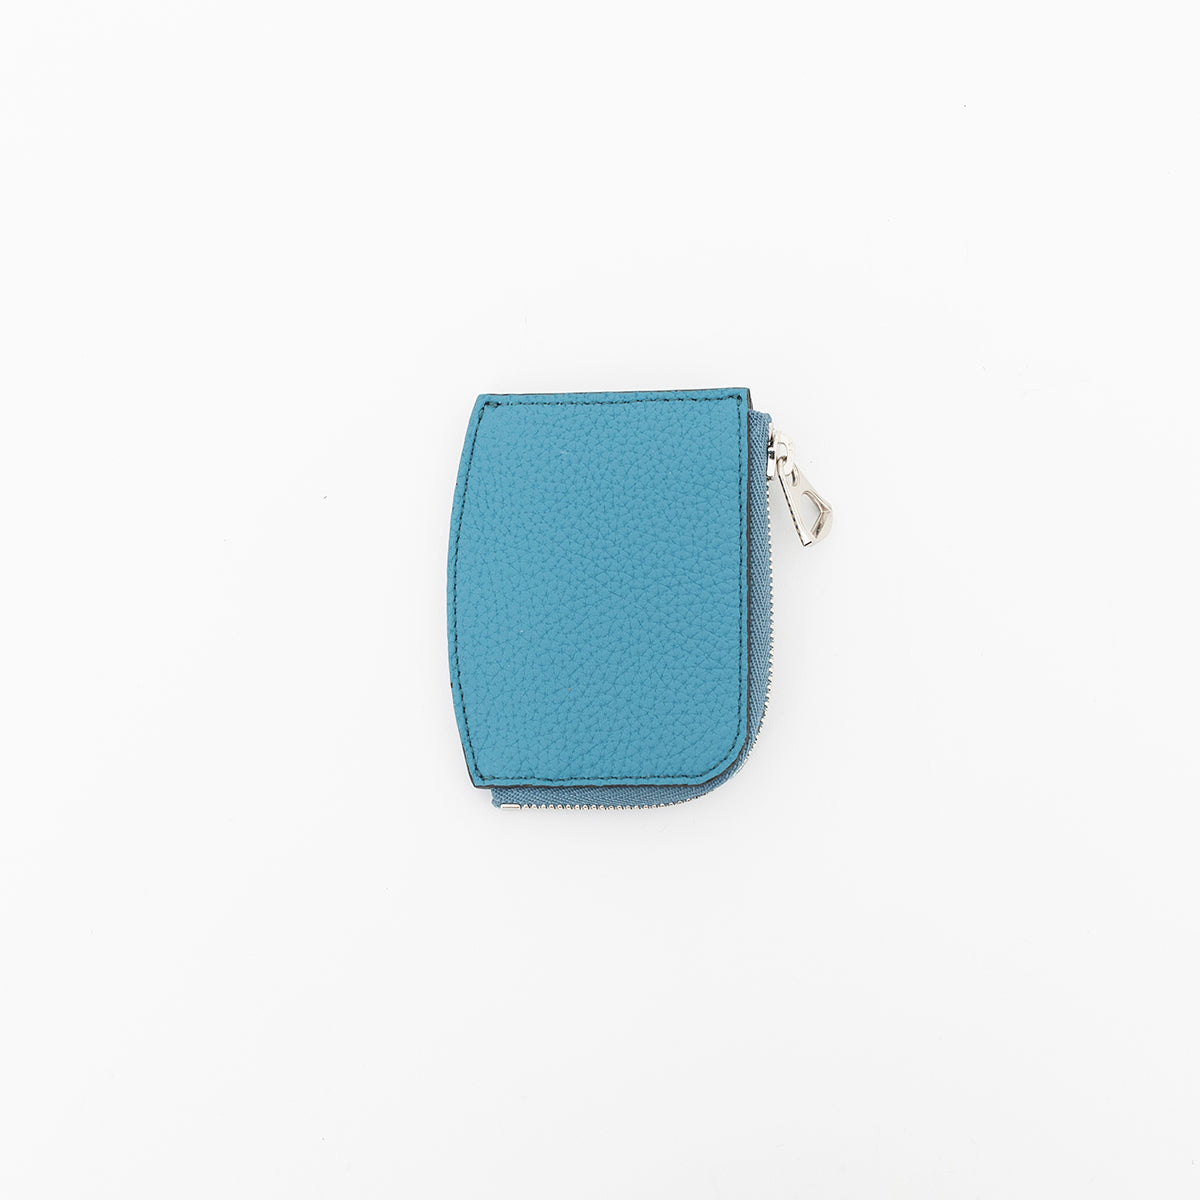 CRISTY KEY COIN CASE / DIPLO FJORD (クリスティキーコインケース